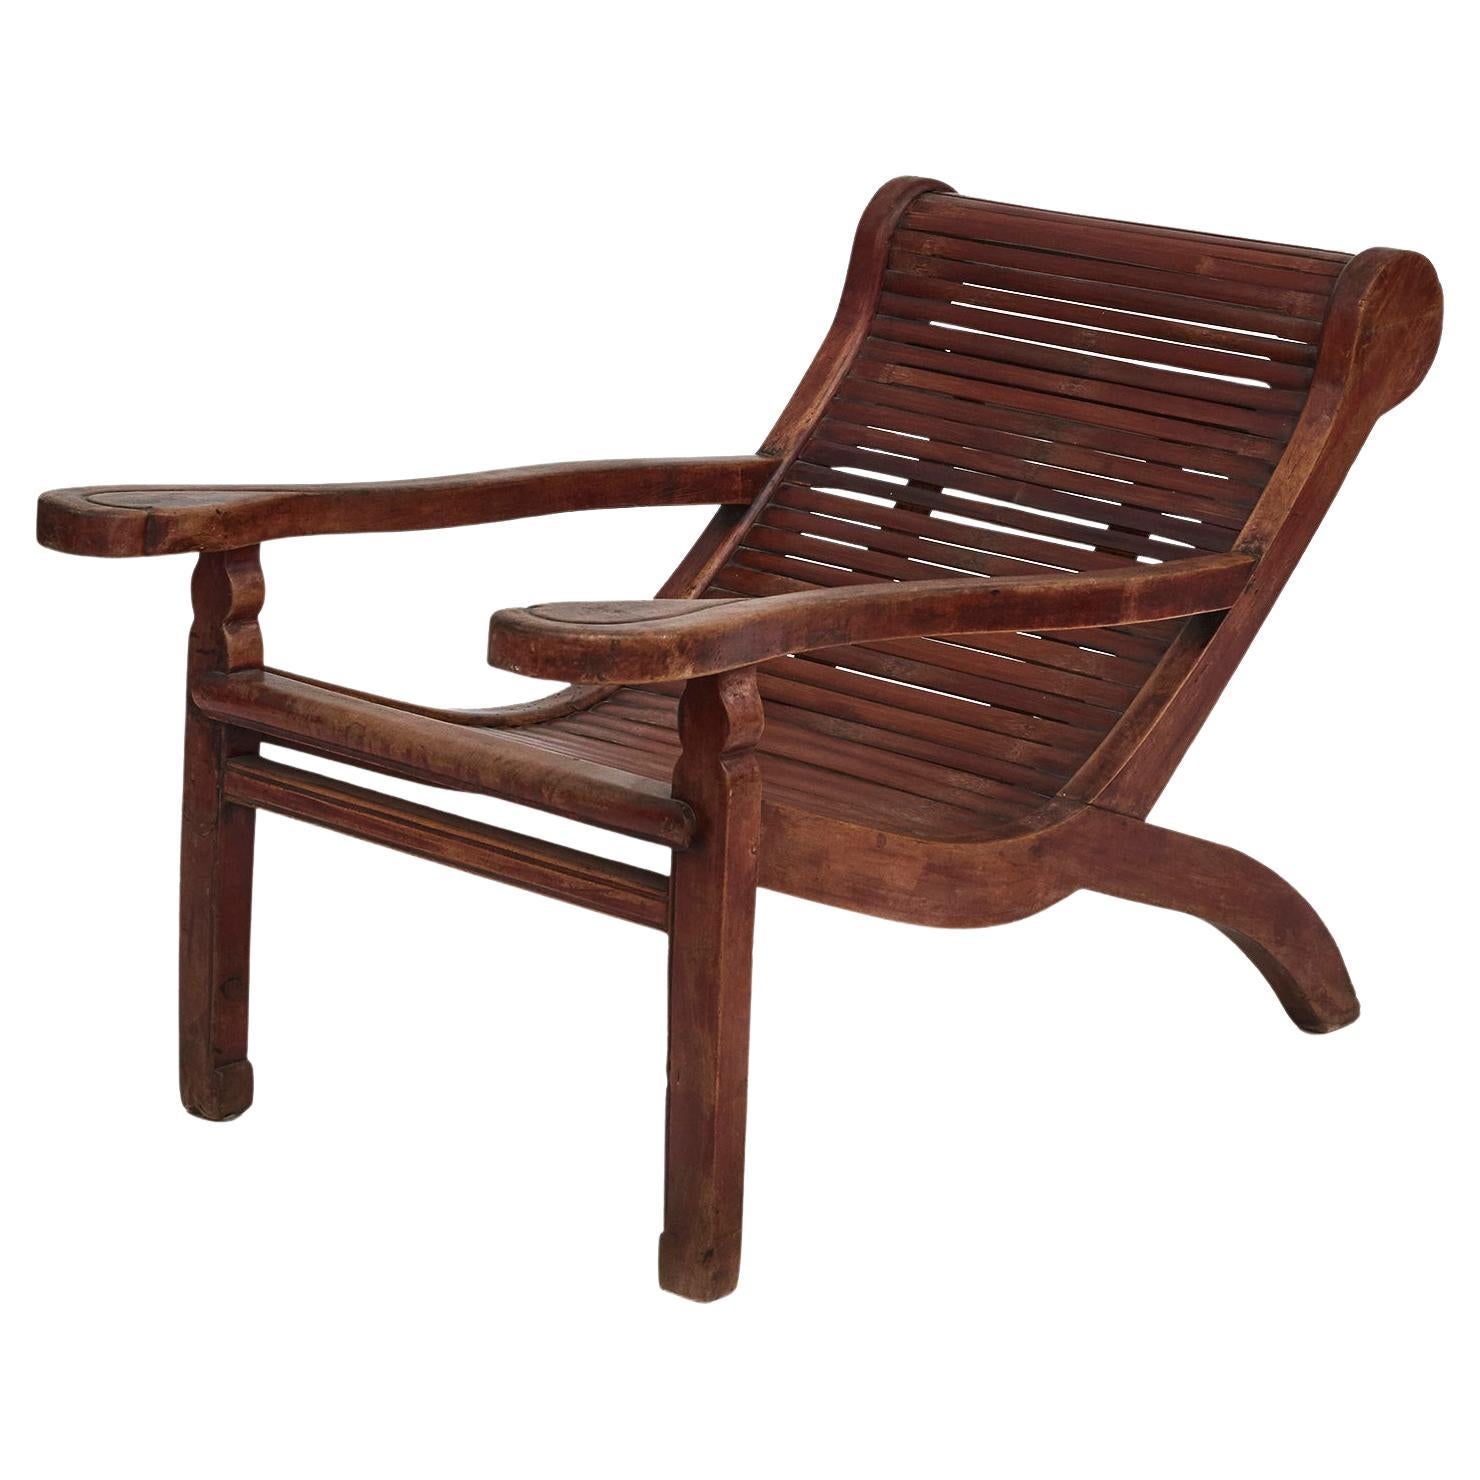 Chinese Plantation Lounge Chair with Curving Seat and Slats For Sale